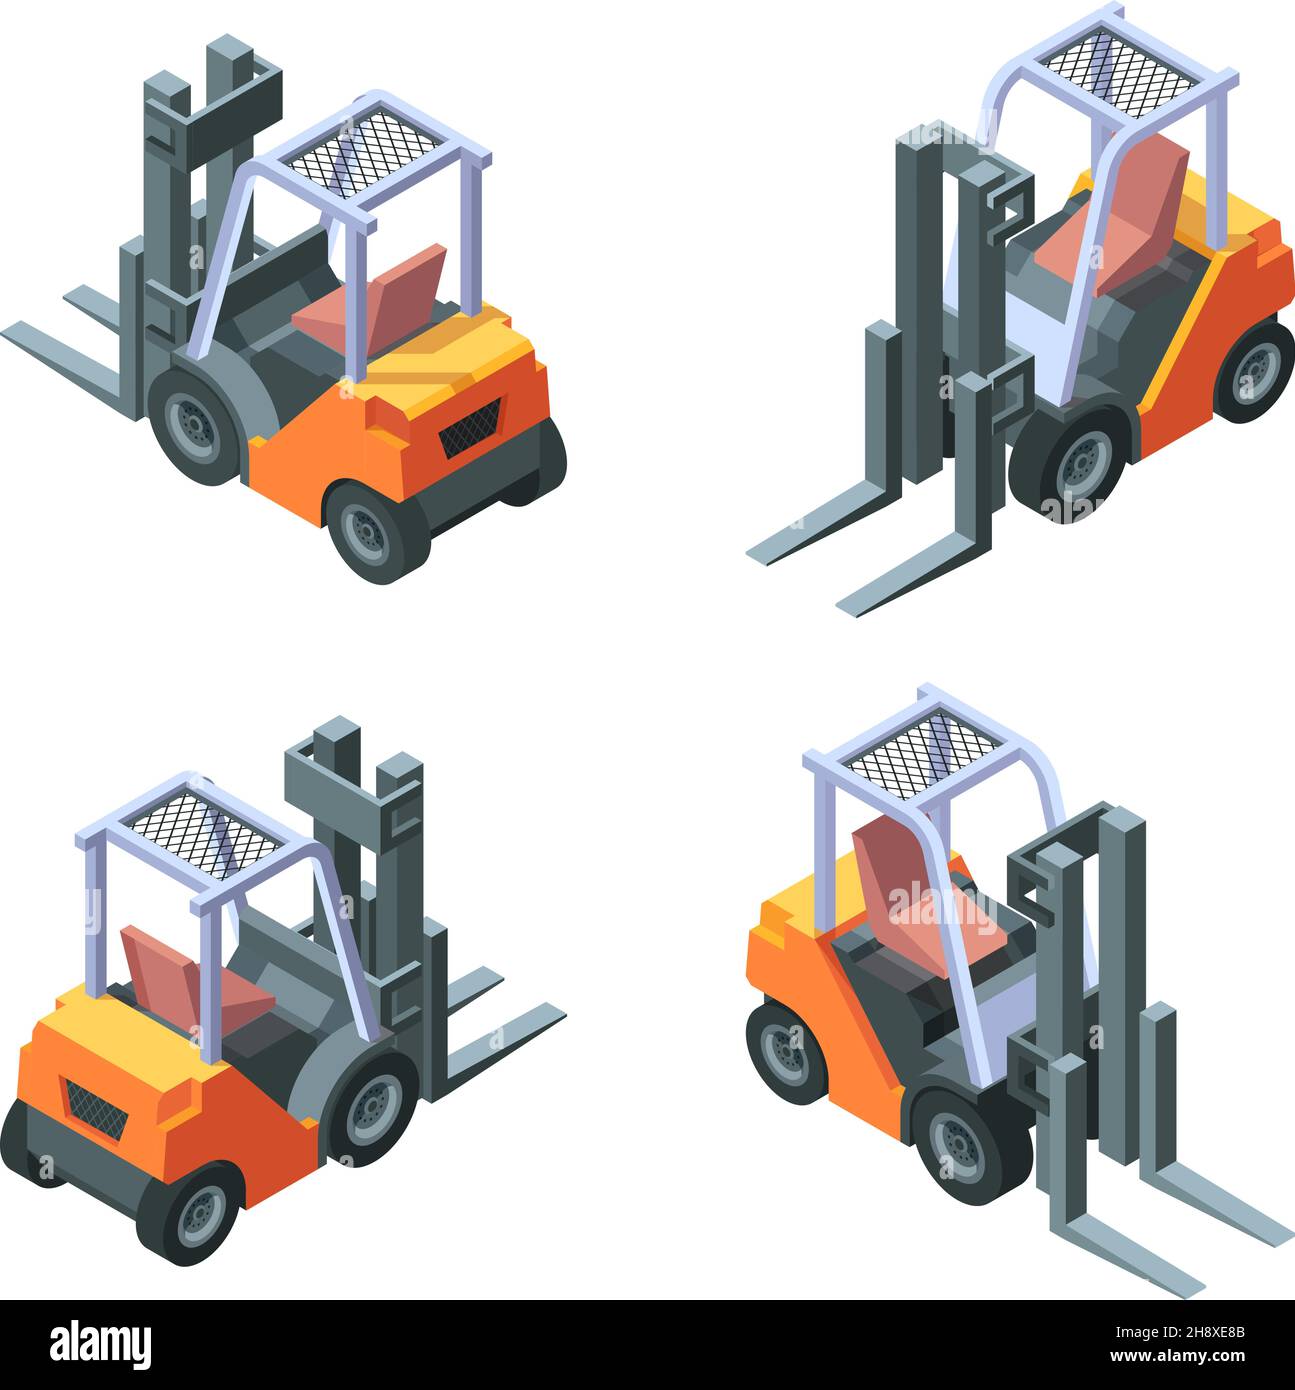 Loader isometric. Manufacturing vehicles trucks with forklift garish vector loading cars illustrations Stock Vector